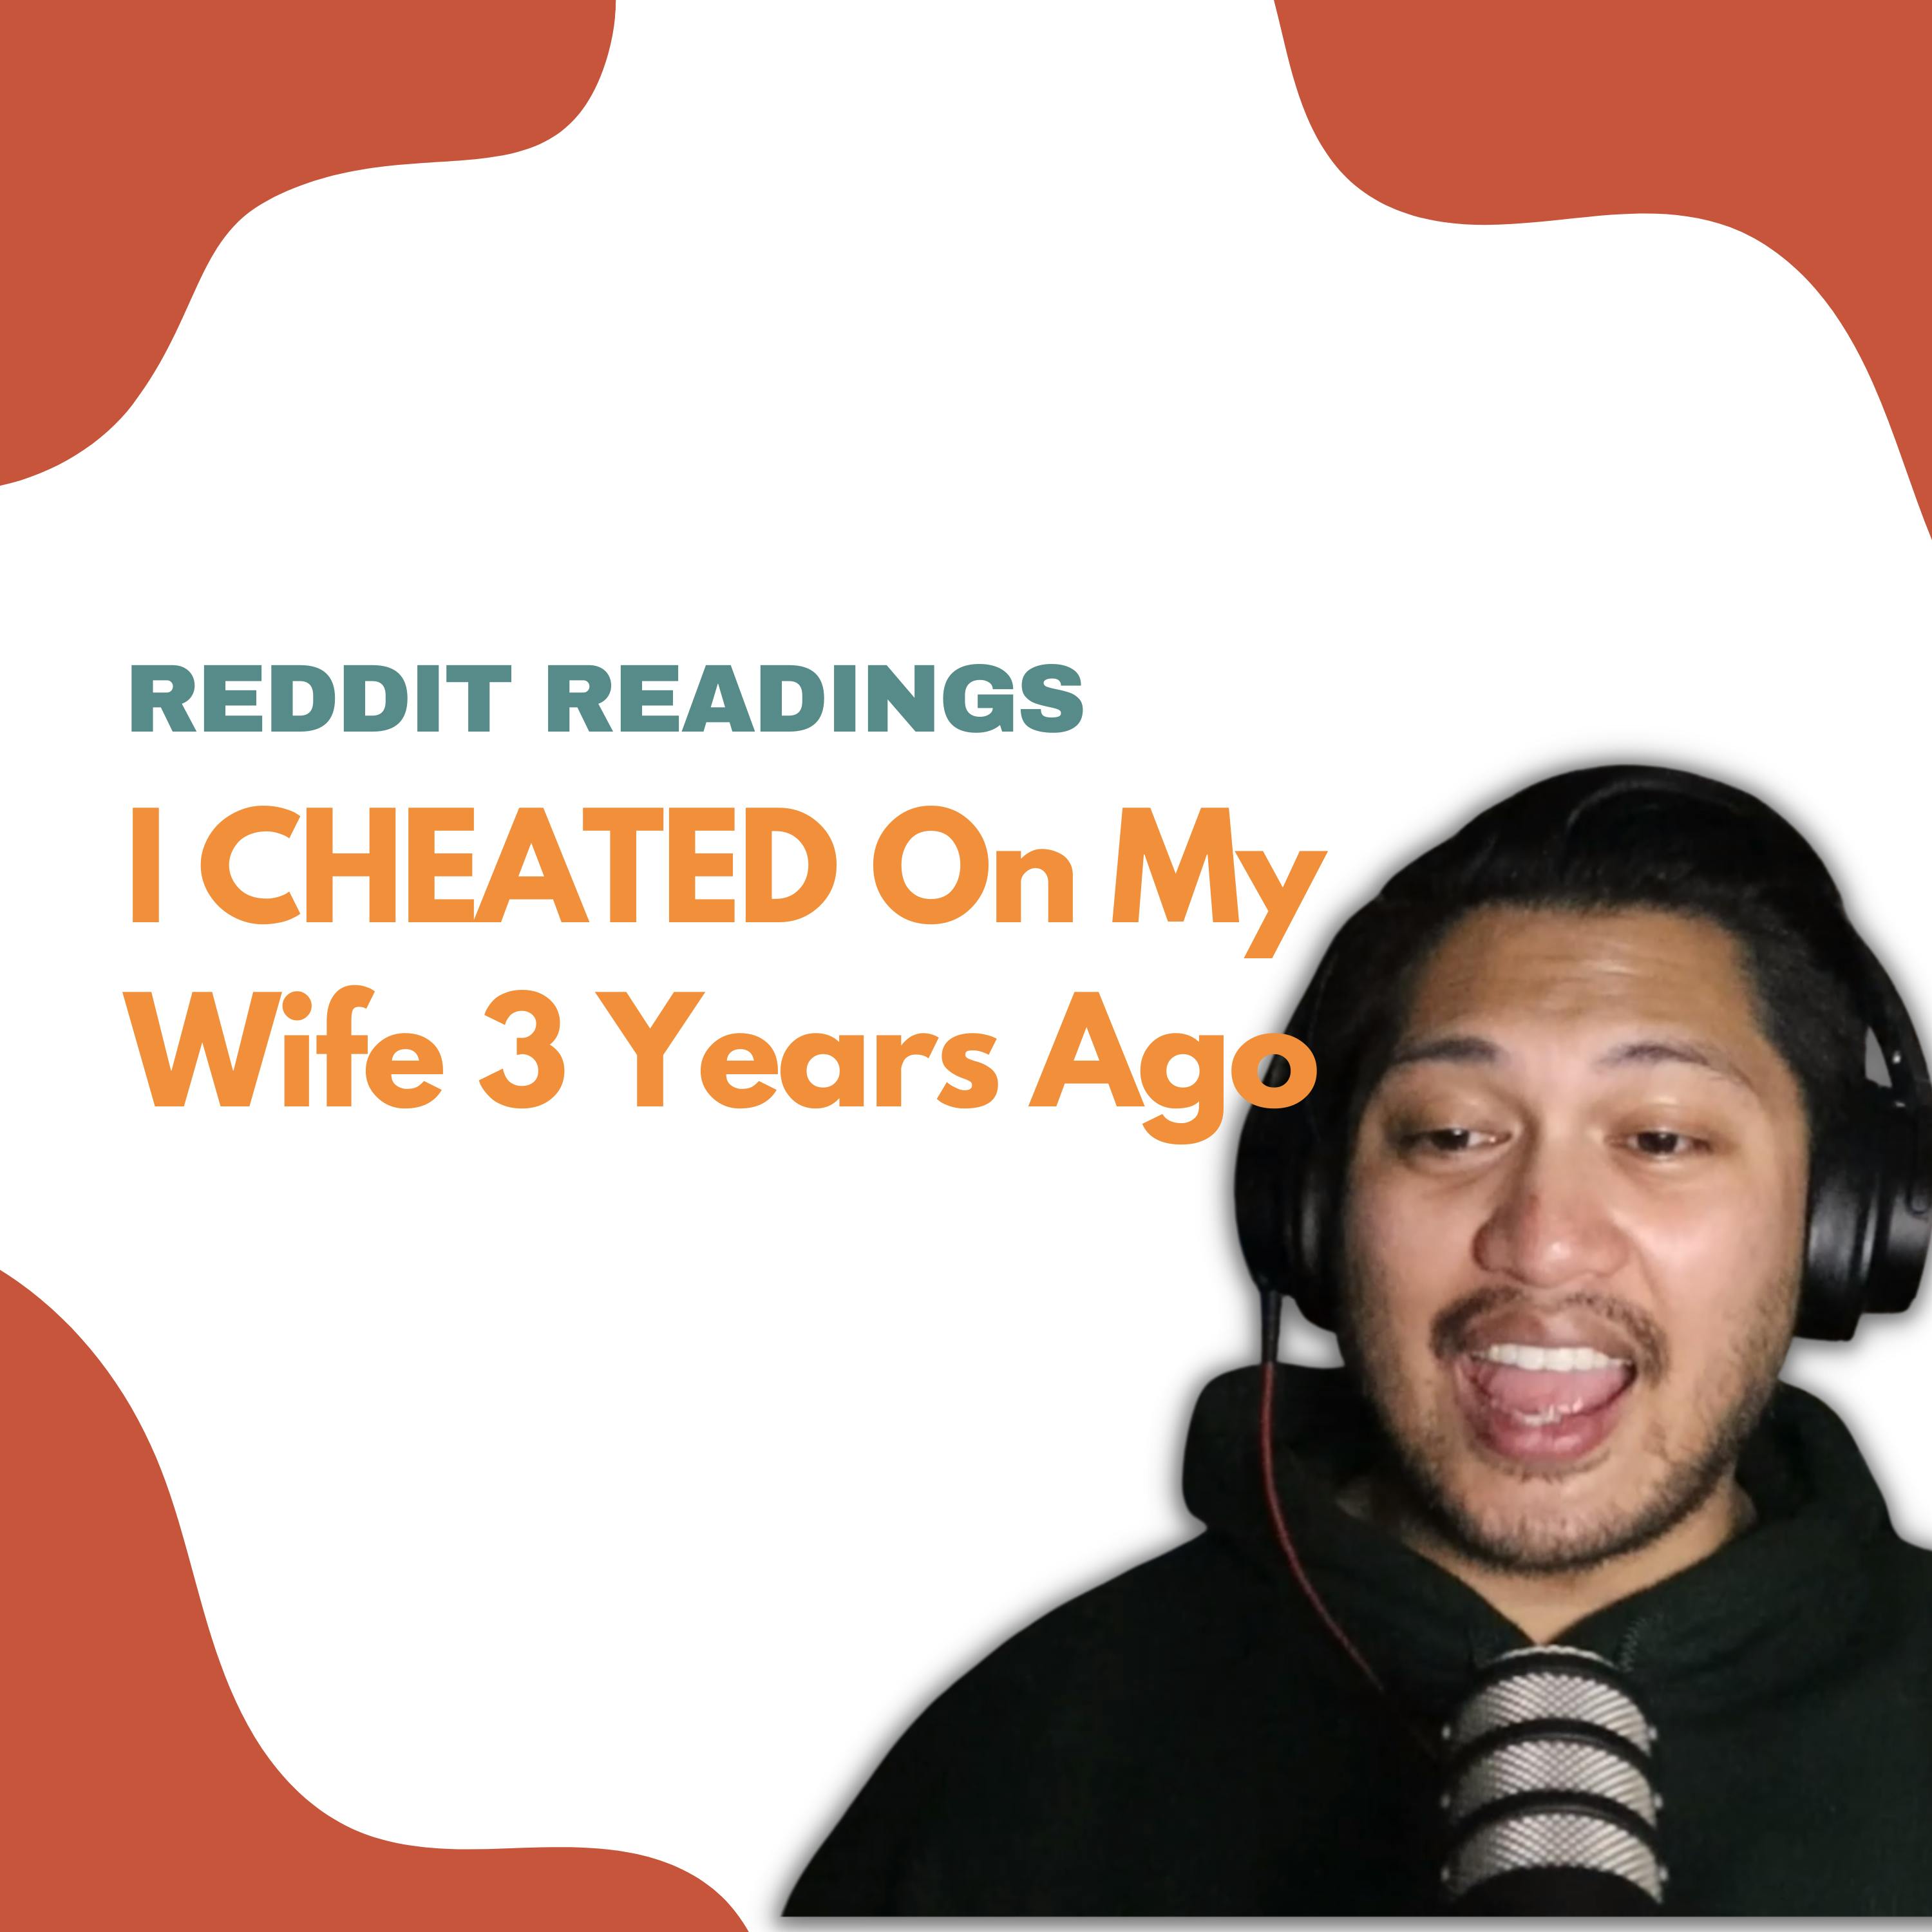 #104: I CHEATED On My Wife 3 Years Ago | Reddit Readings